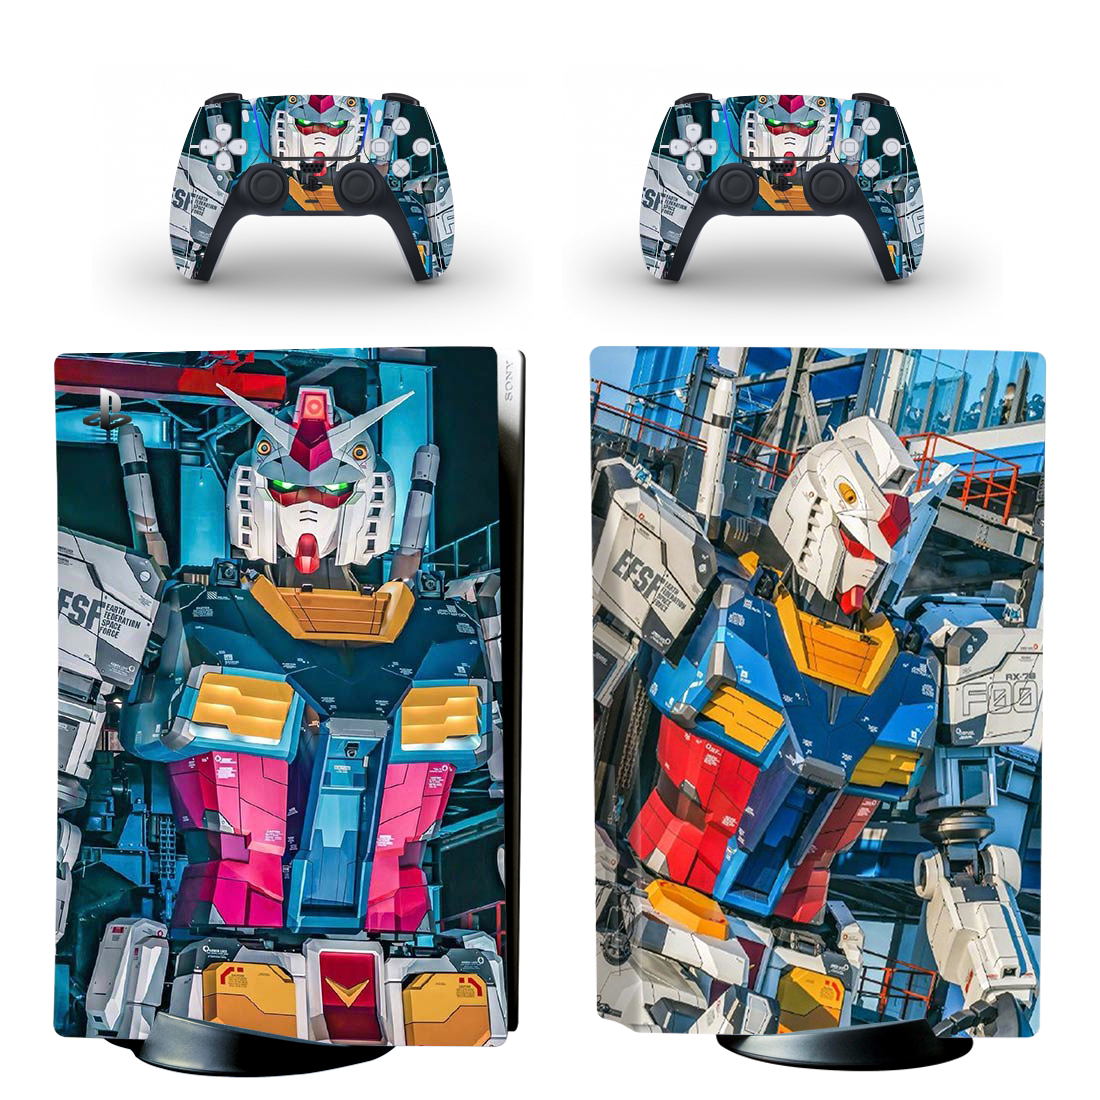 Mobile Suit Gundam PS5 Skin Sticker And Controllers